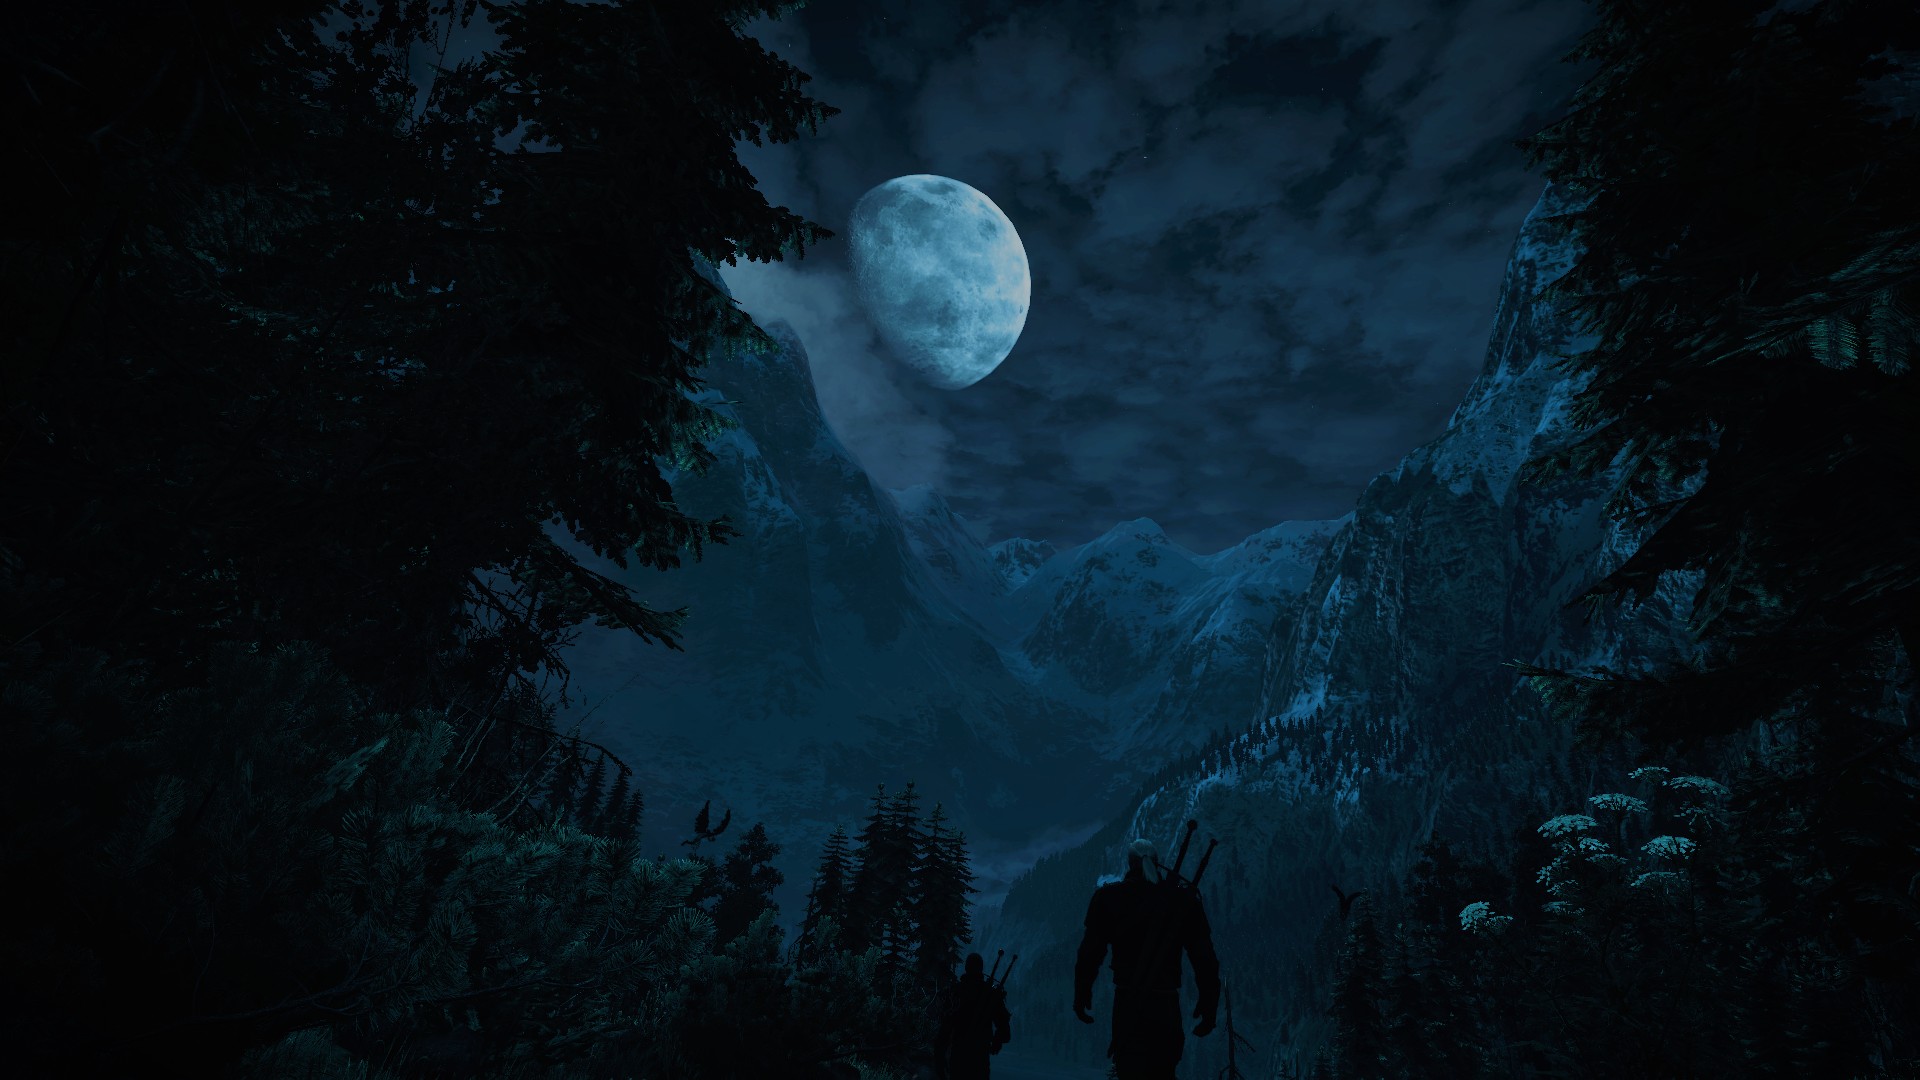 The Witcher, The Witcher 3: Wild Hunt, Night, Moon, Video games, Fantasy art Wallpaper